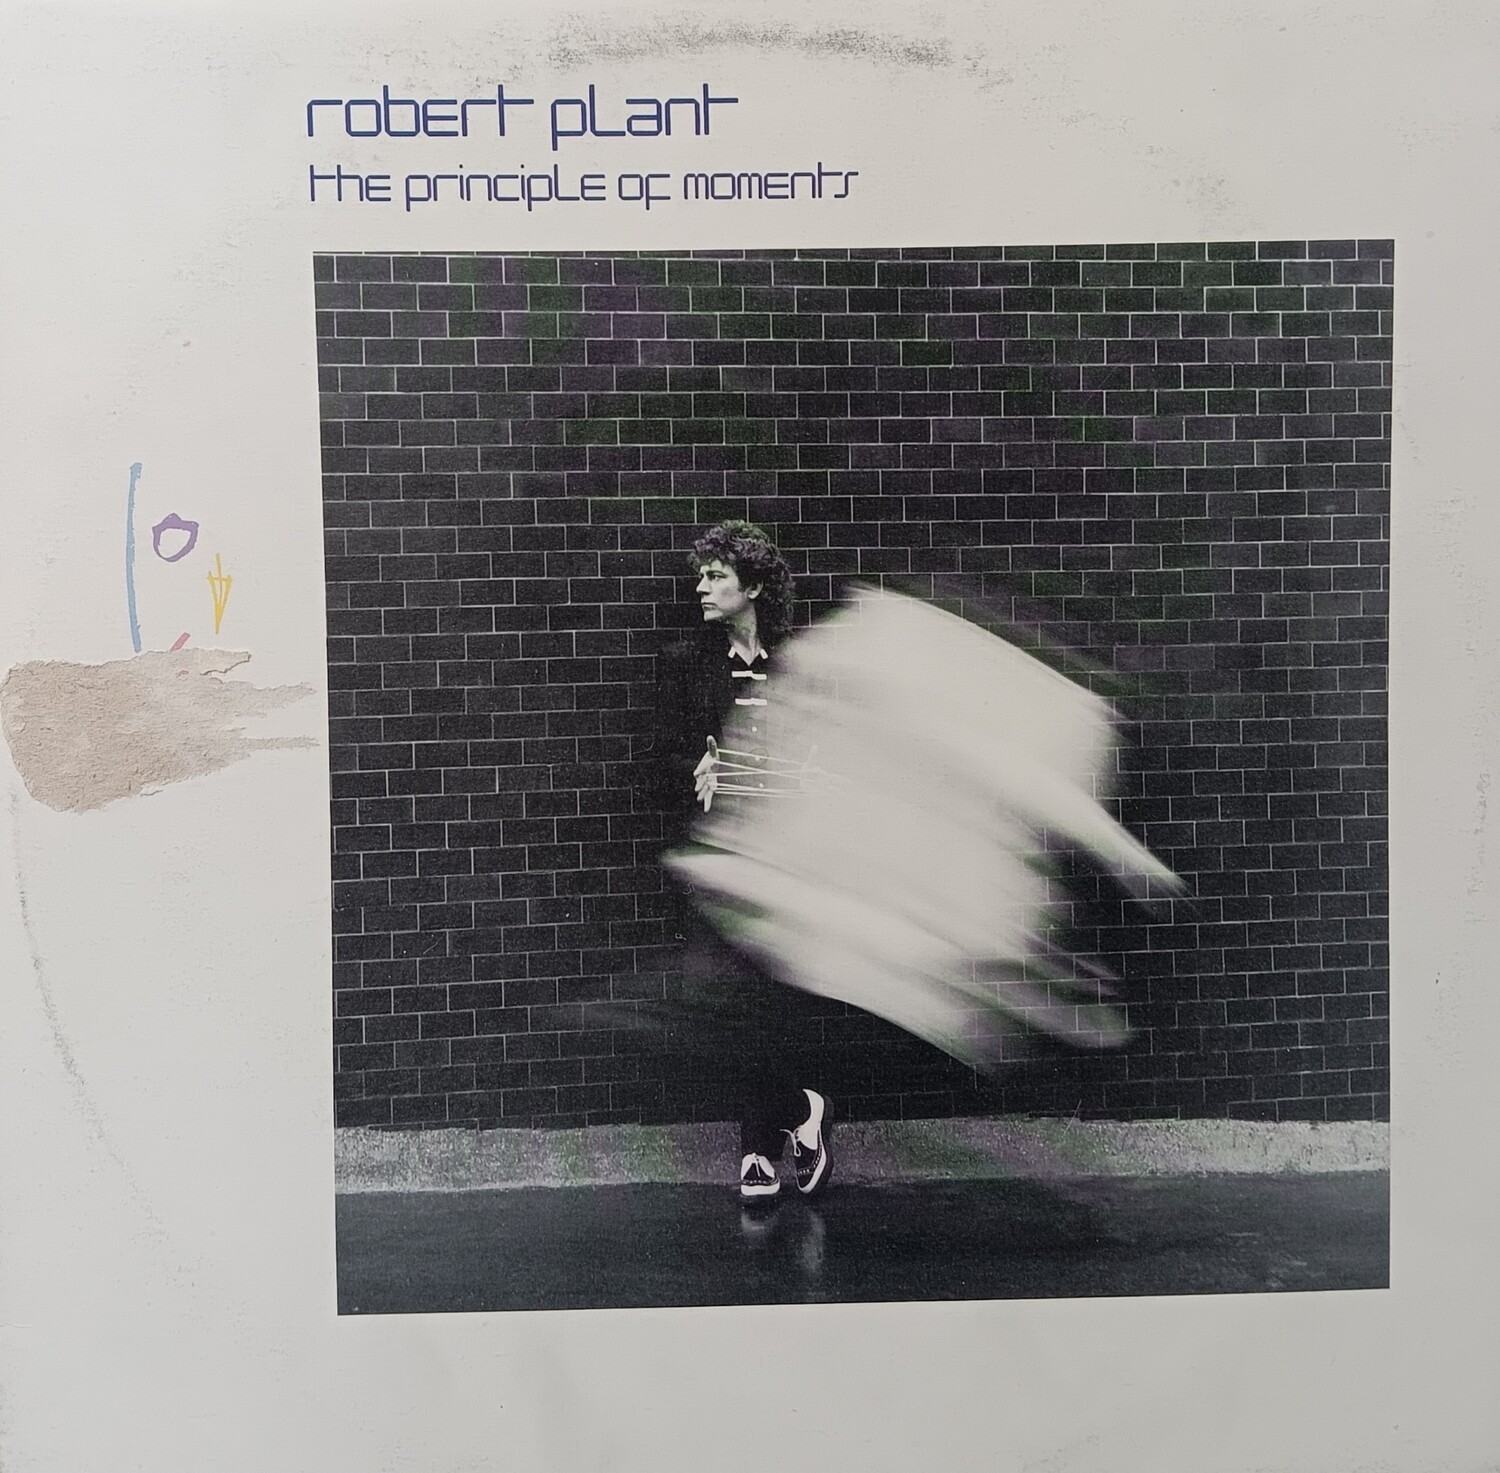 ROBERT PLANT - The principle of moments